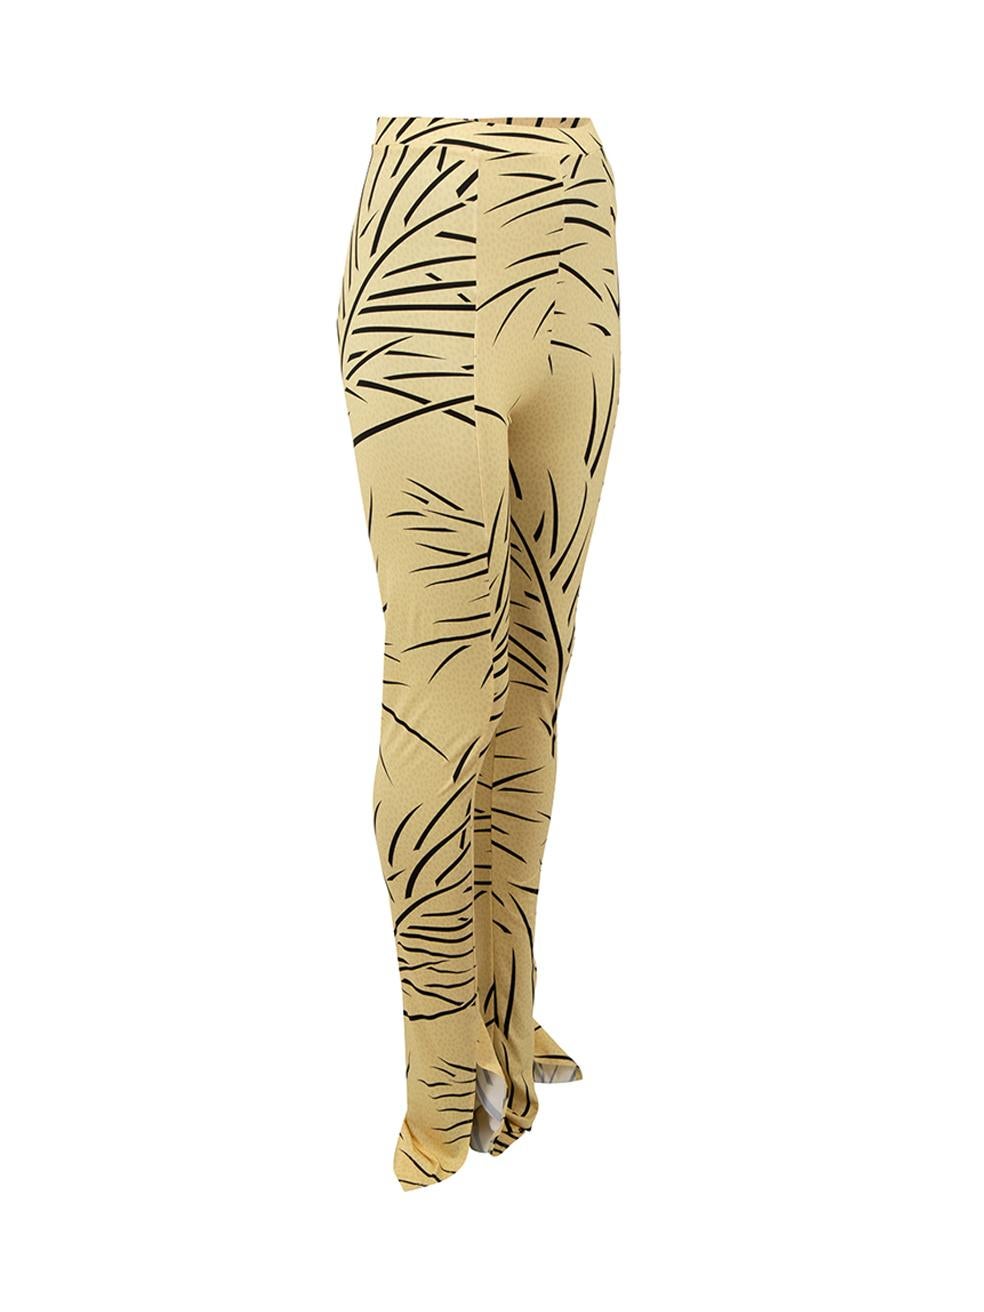 CONDITION is Never worn, with tags. No visible wear to trousers is evident on this new Rodarte designer resale item.



Details


Yellow

Synthetic

Leggings

Animal print

High rise

Stretchy

Open seam cuff





Made in USA 



Composition

80%